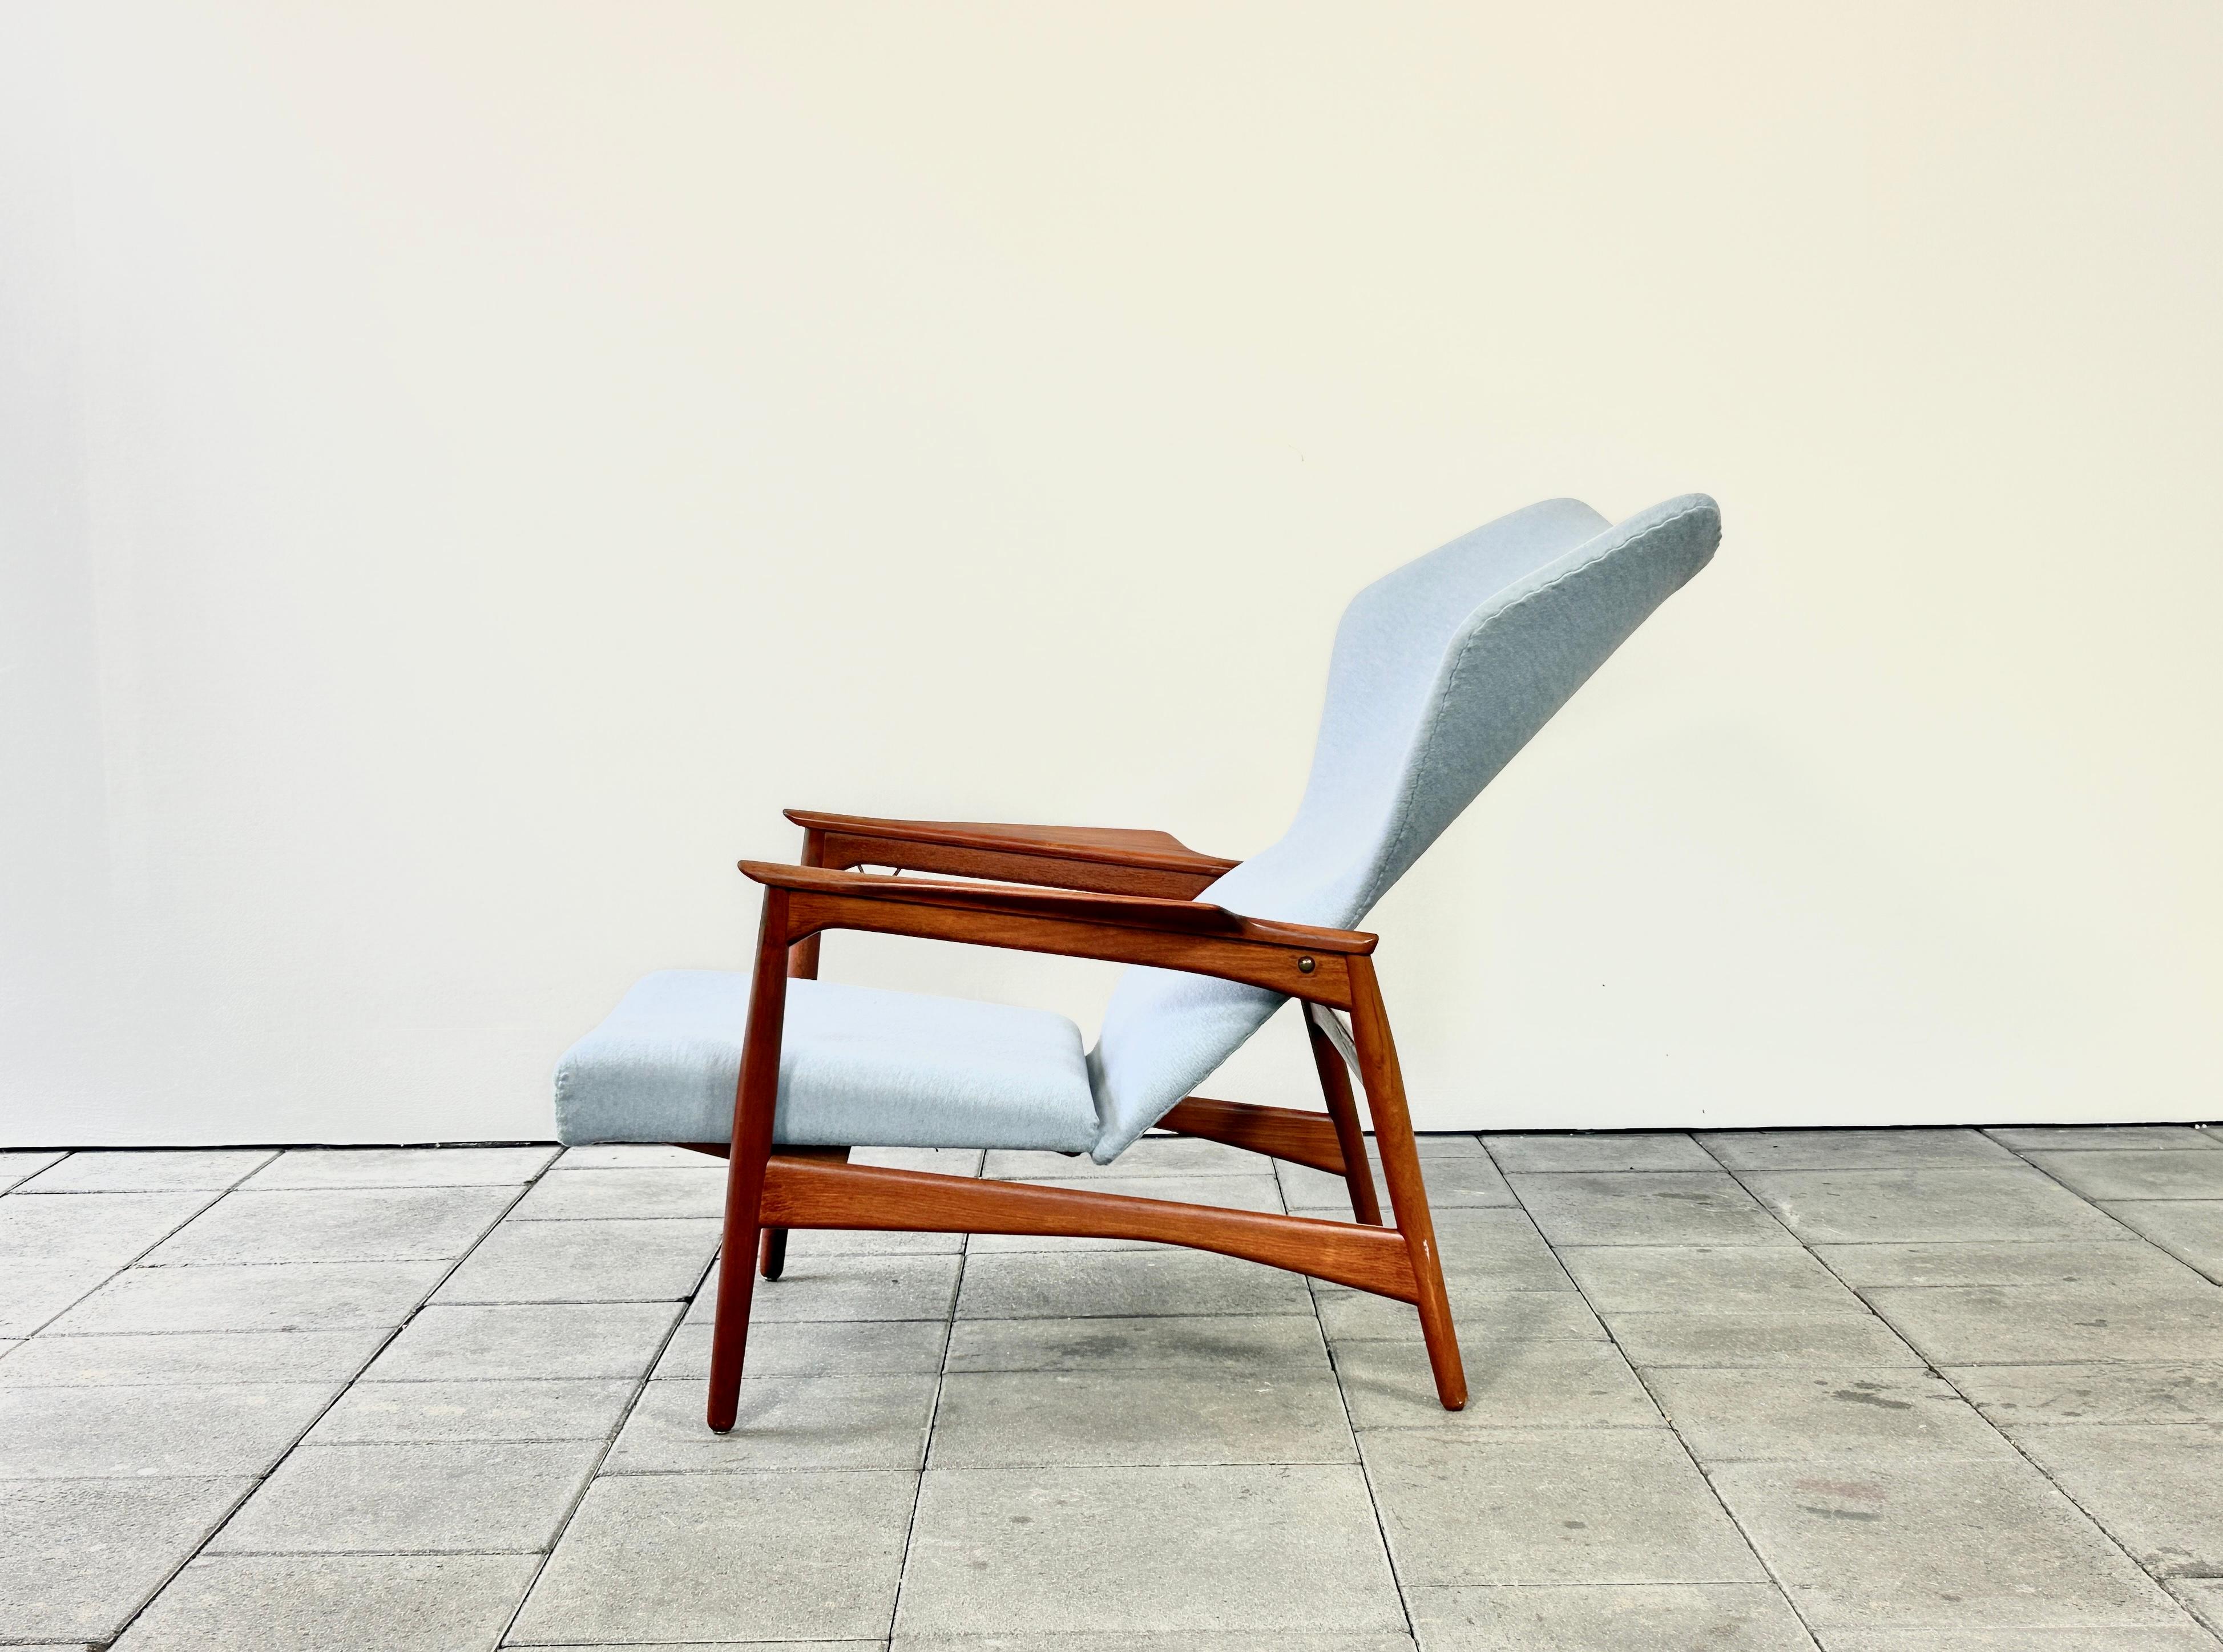 Wood Carlo Wingback Lounge Chair designed by Ib Kofod Larsen 1954 For Sale